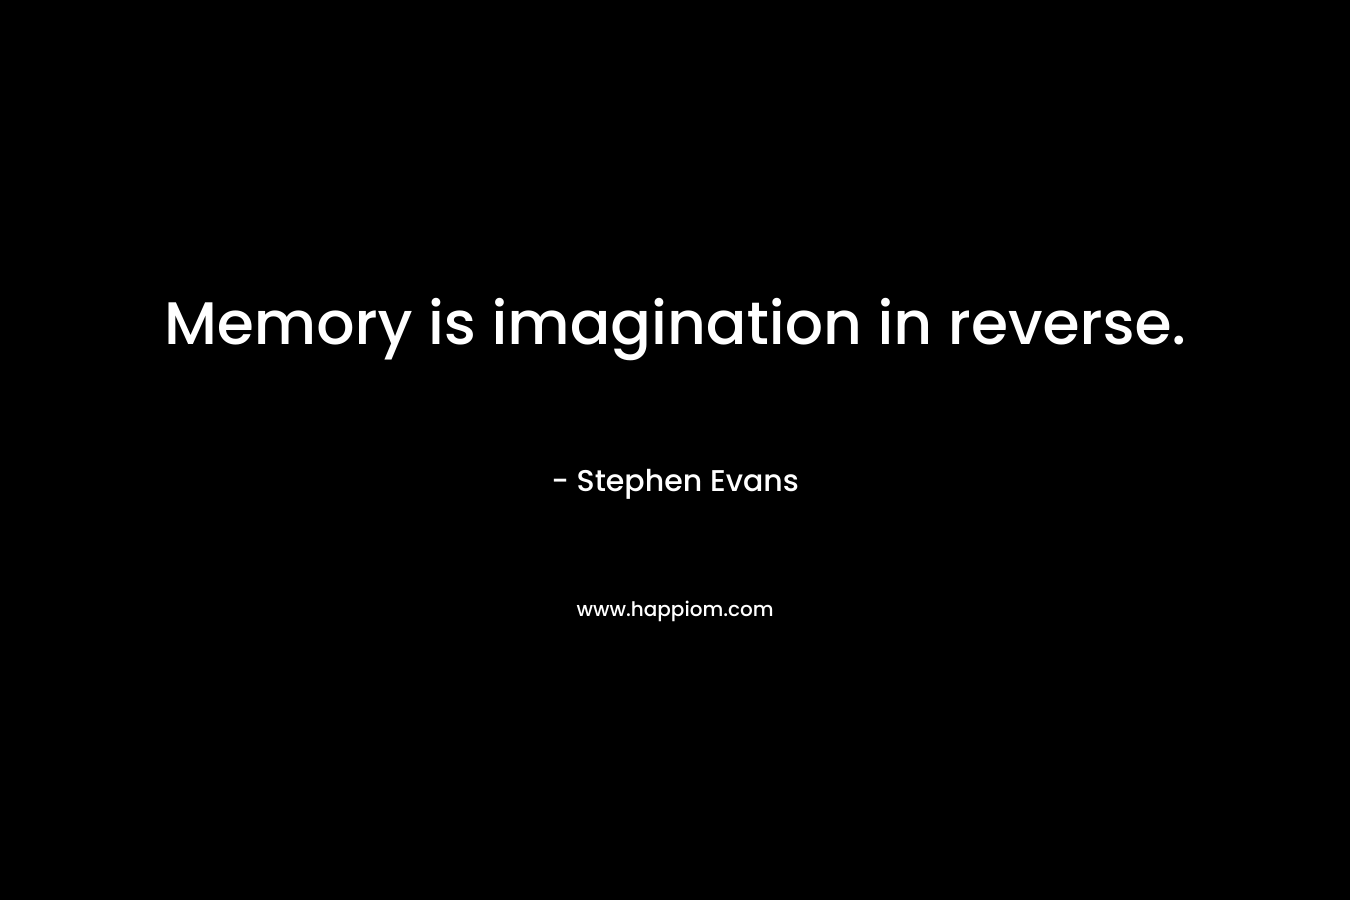 Memory is imagination in reverse.